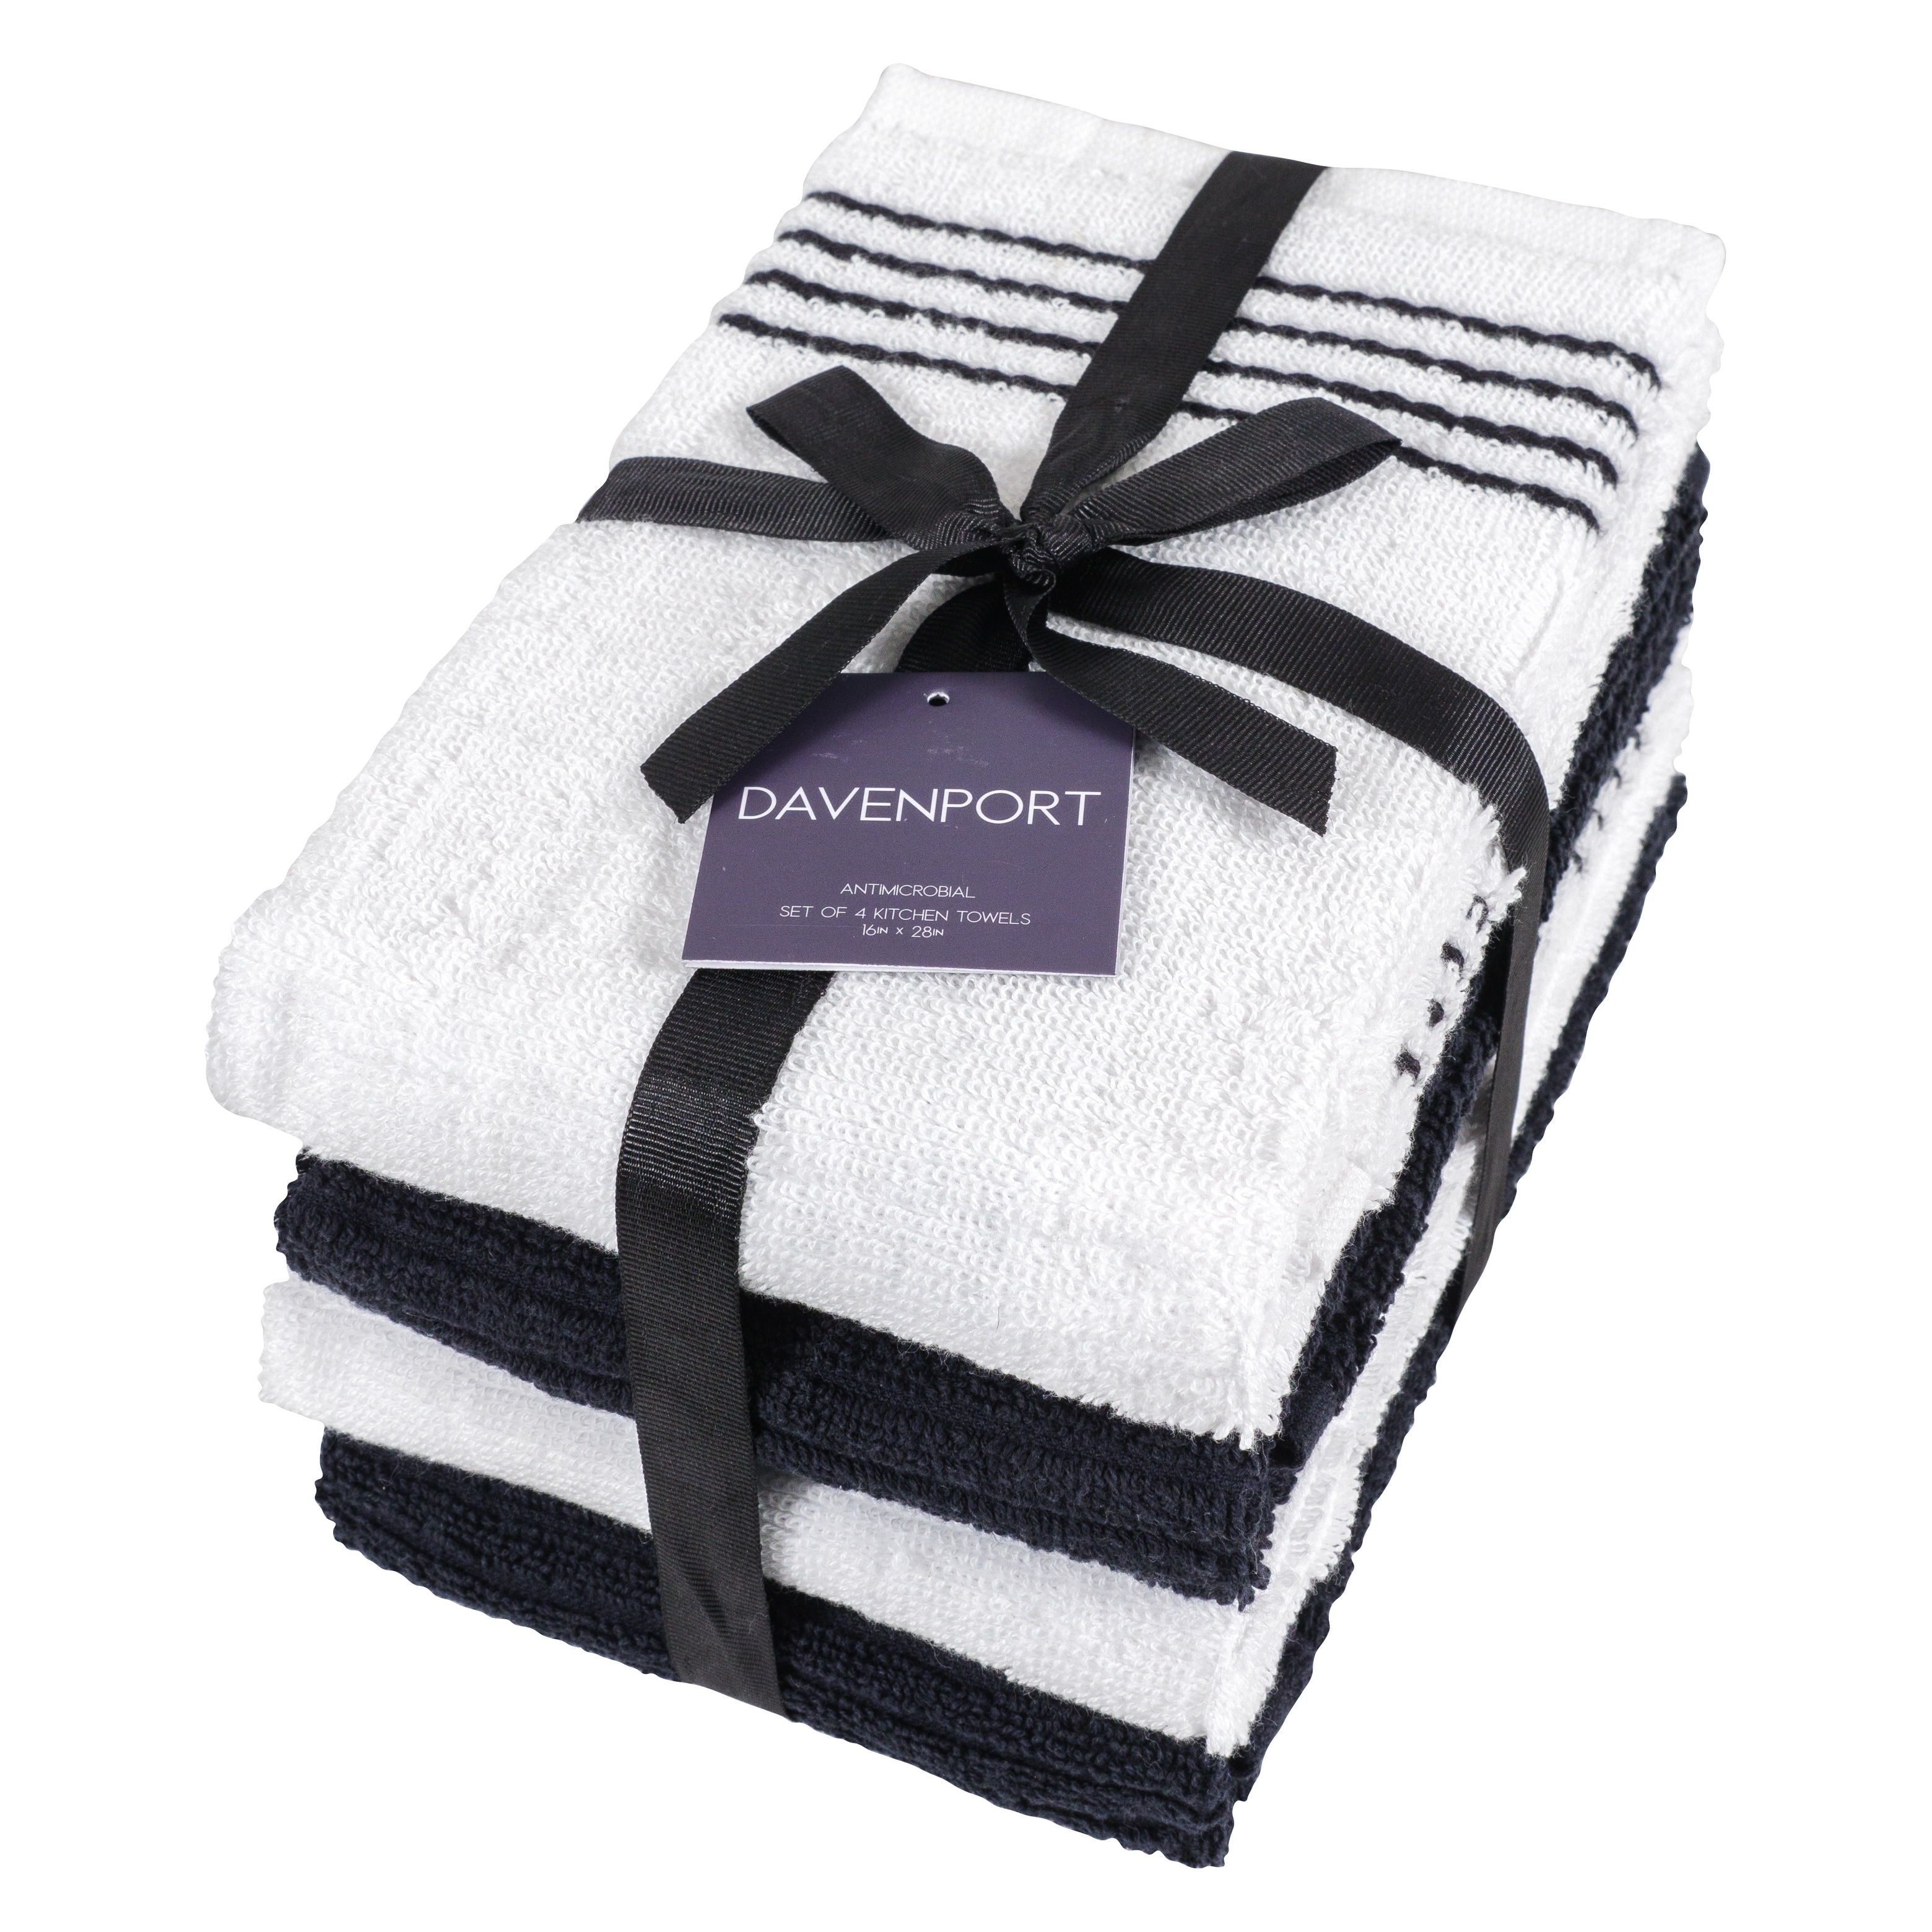 https://ak1.ostkcdn.com/images/products/is/images/direct/e74d85a762129d0cc9289e1a765a1d352a3b4c6c/Davenport-Terry-Kitchen-Towels%2C-Set-of-4.jpg